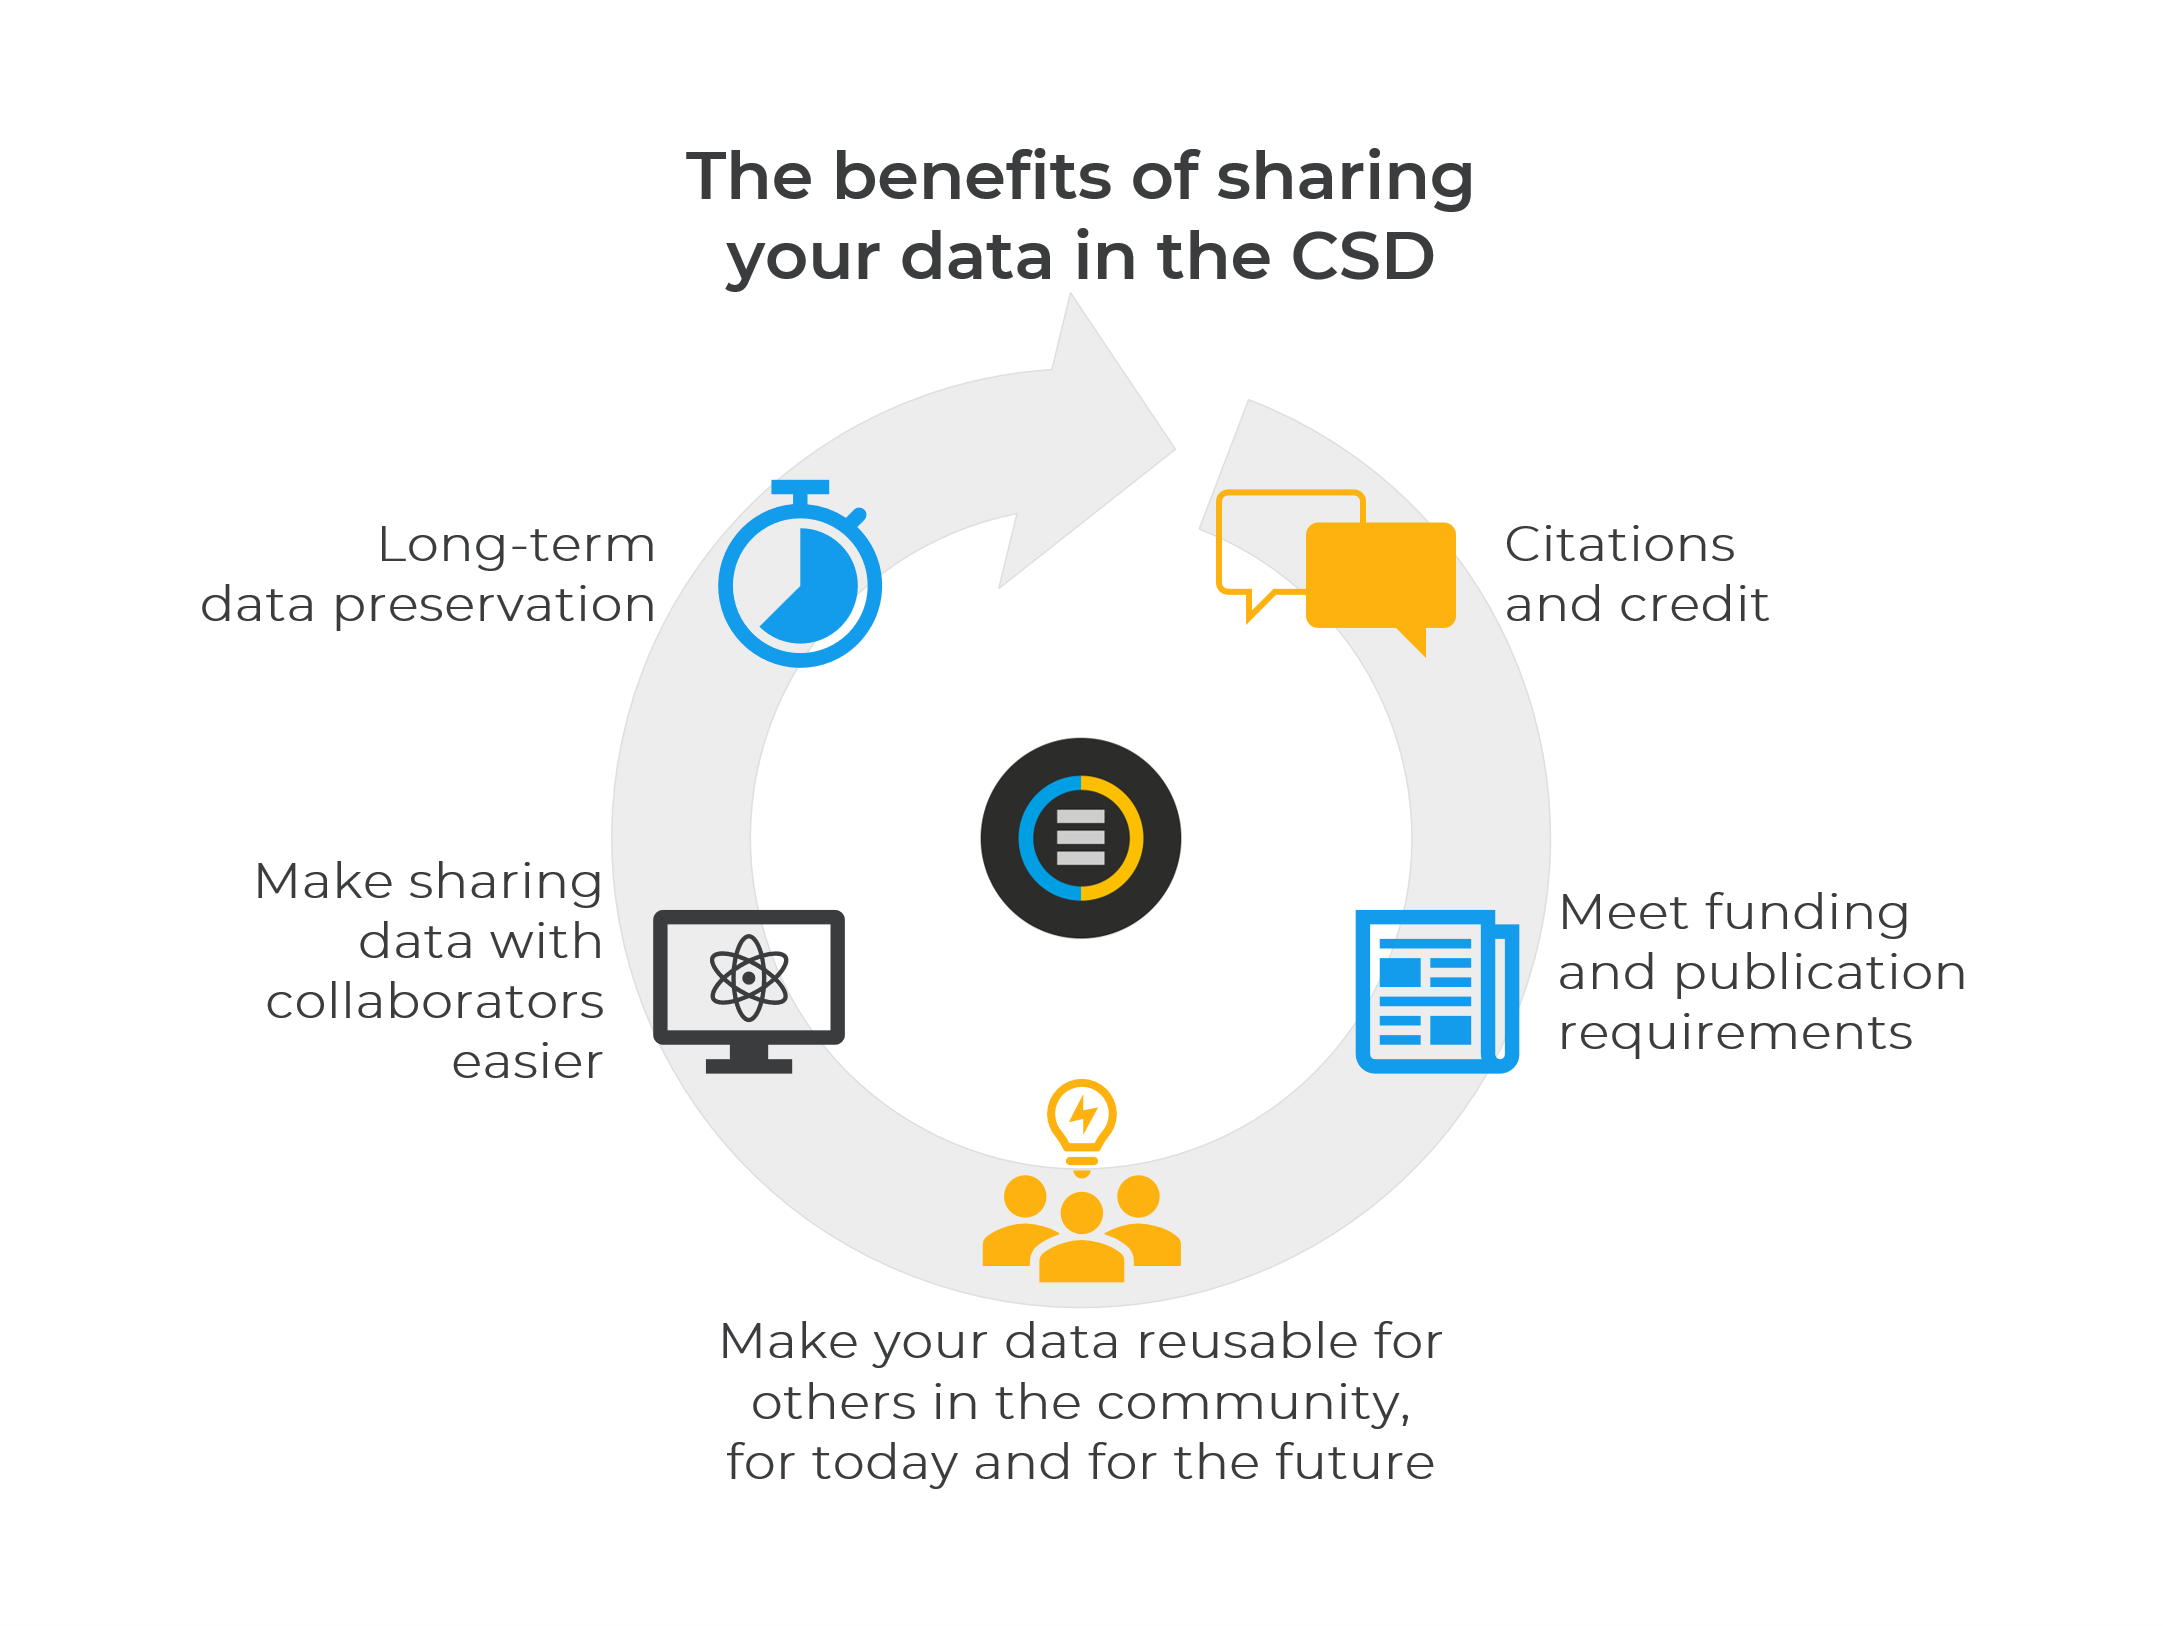 The benefits of data sharing